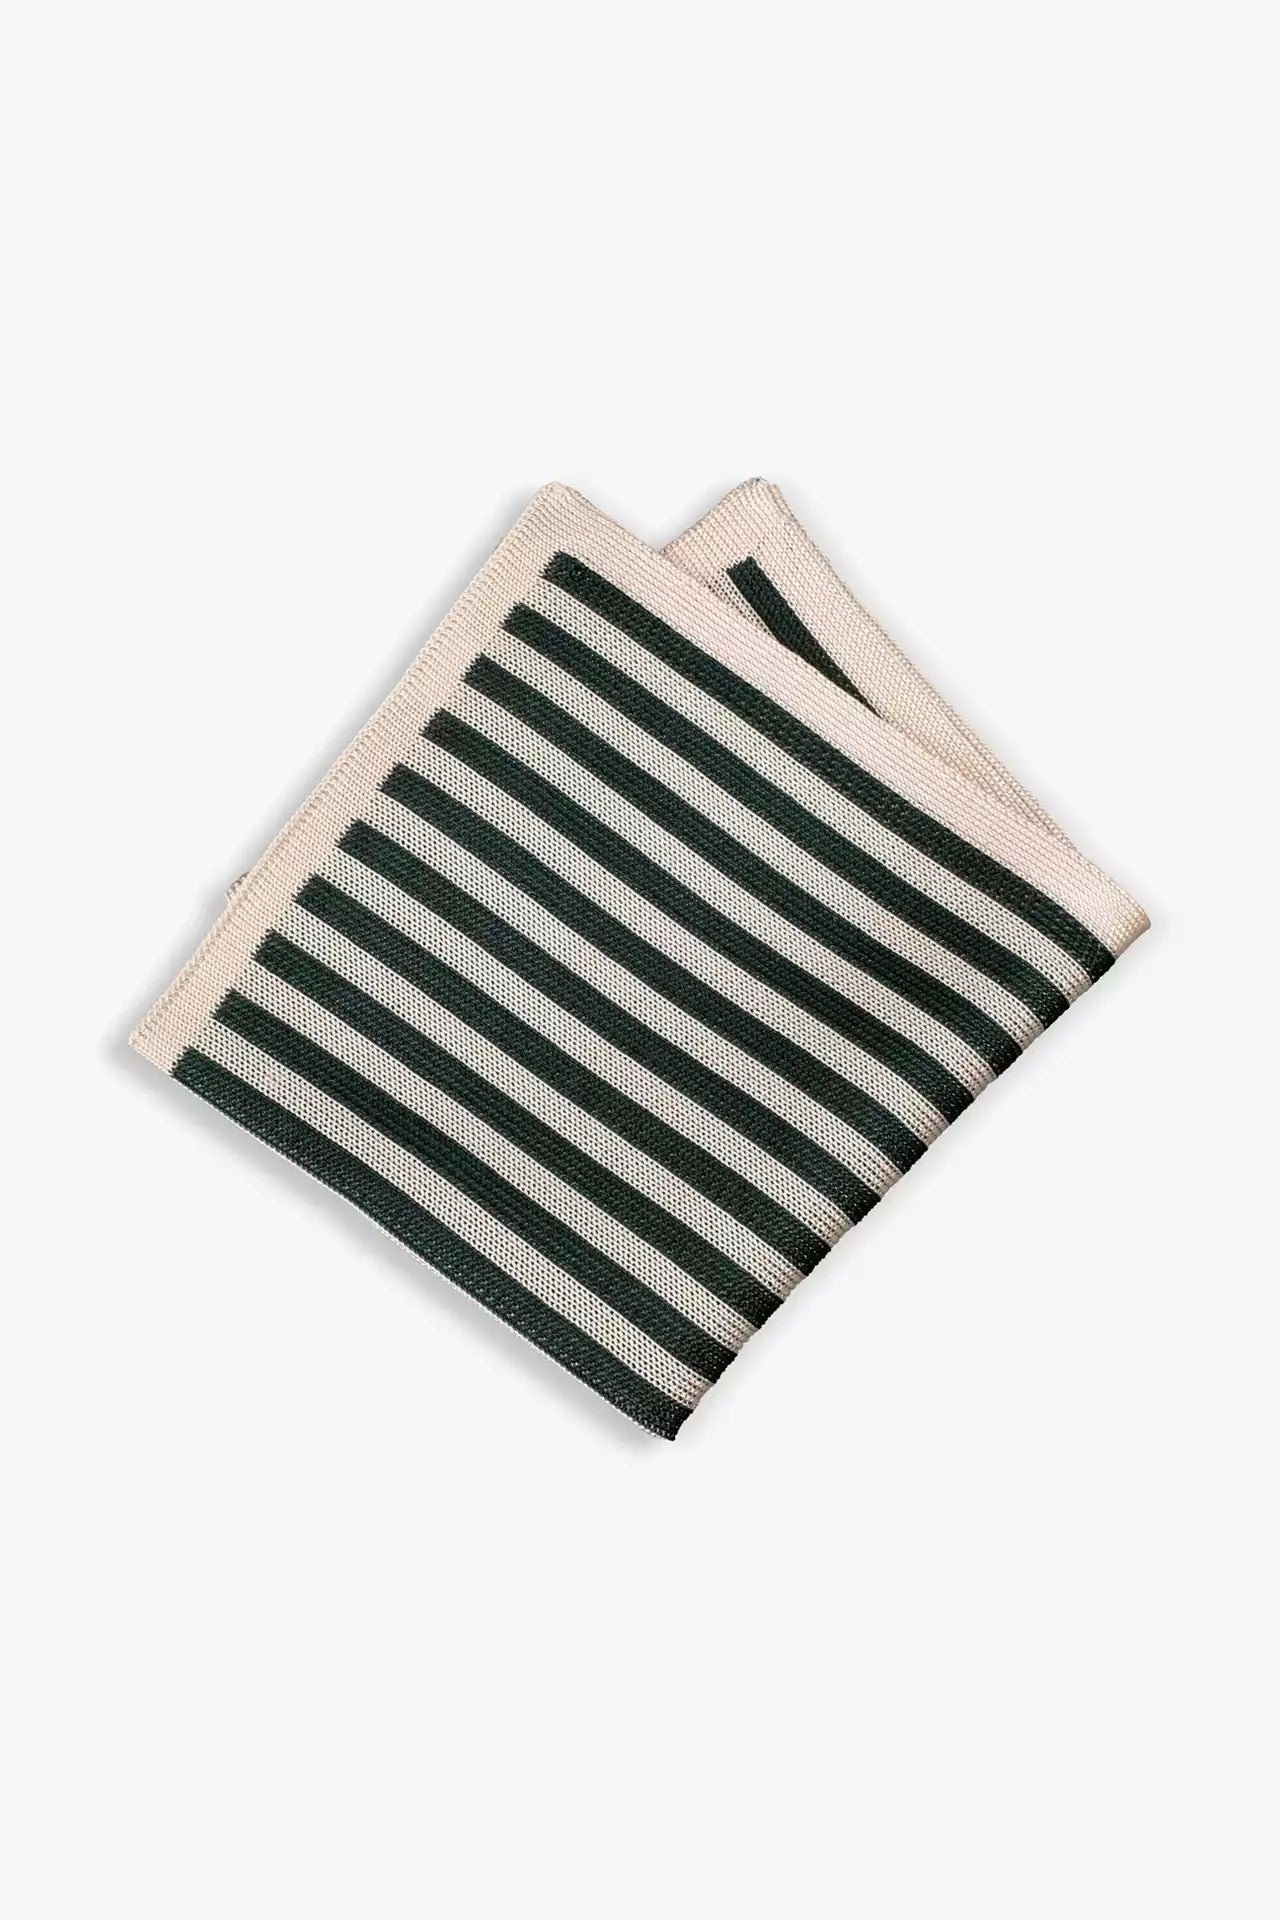 Green and white striped knitted silk pocket square. Made in Italy.